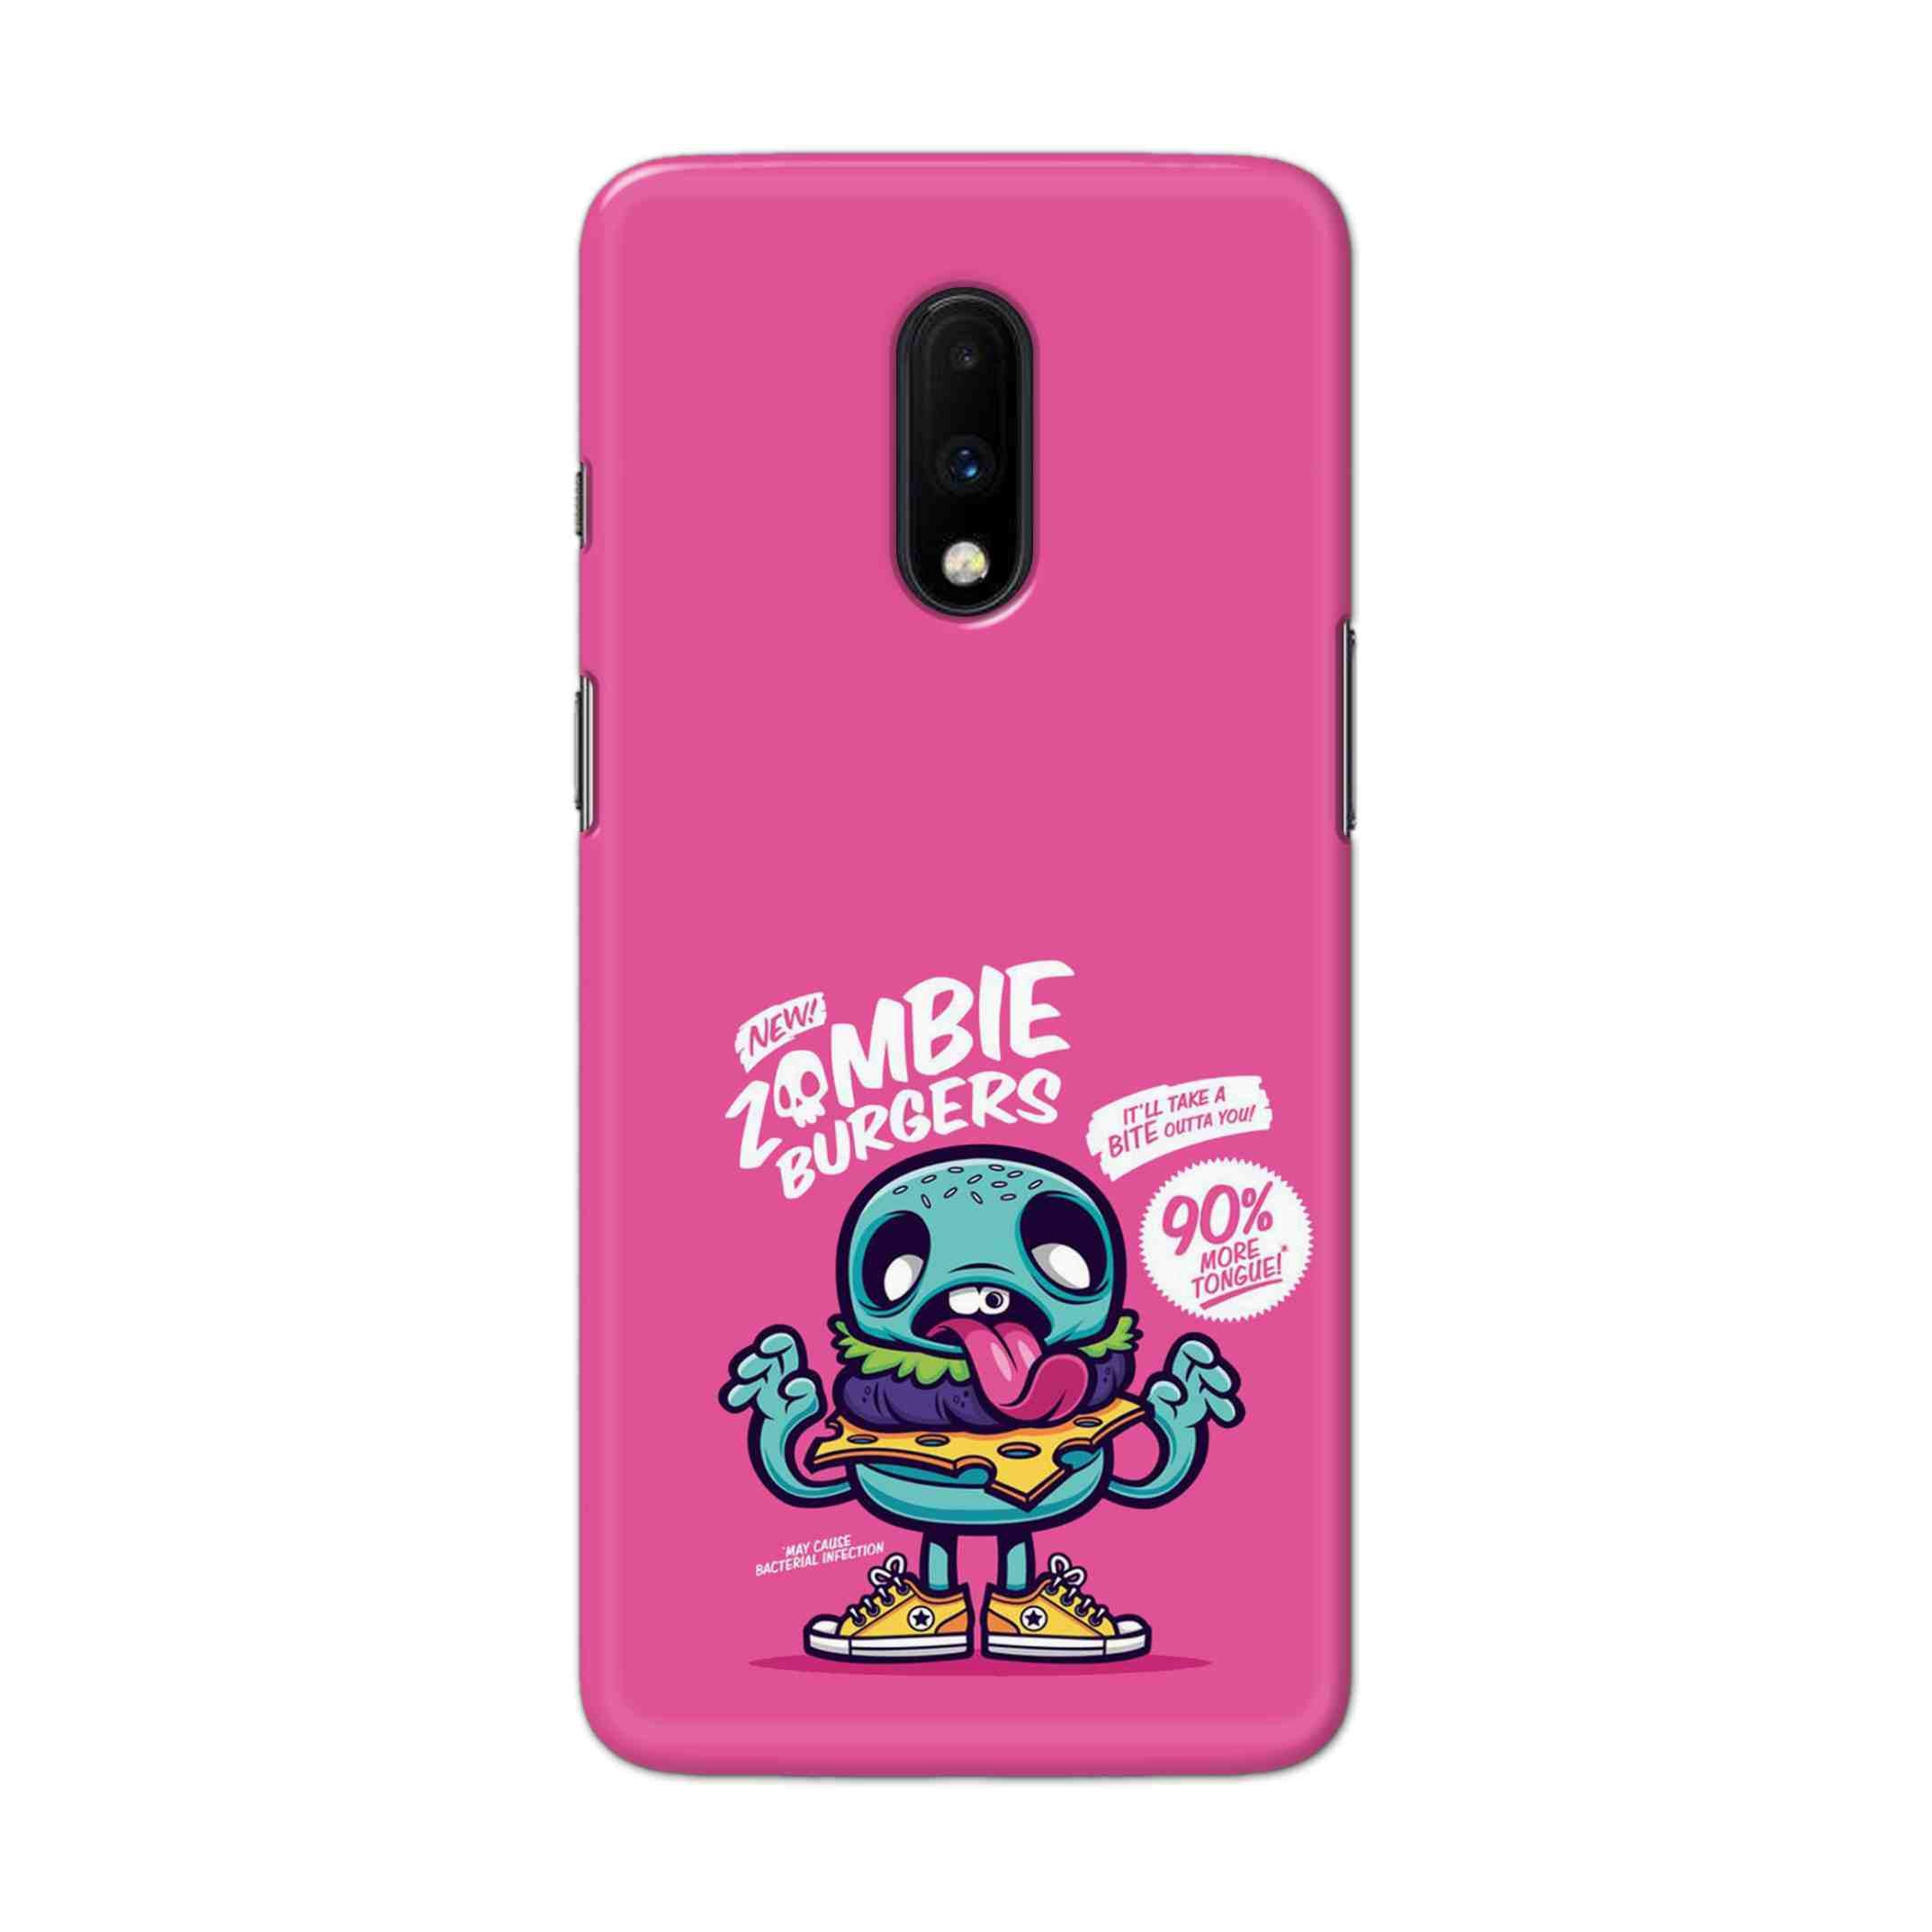 Buy New Zombie Burgers Hard Back Mobile Phone Case Cover For OnePlus 7 Online